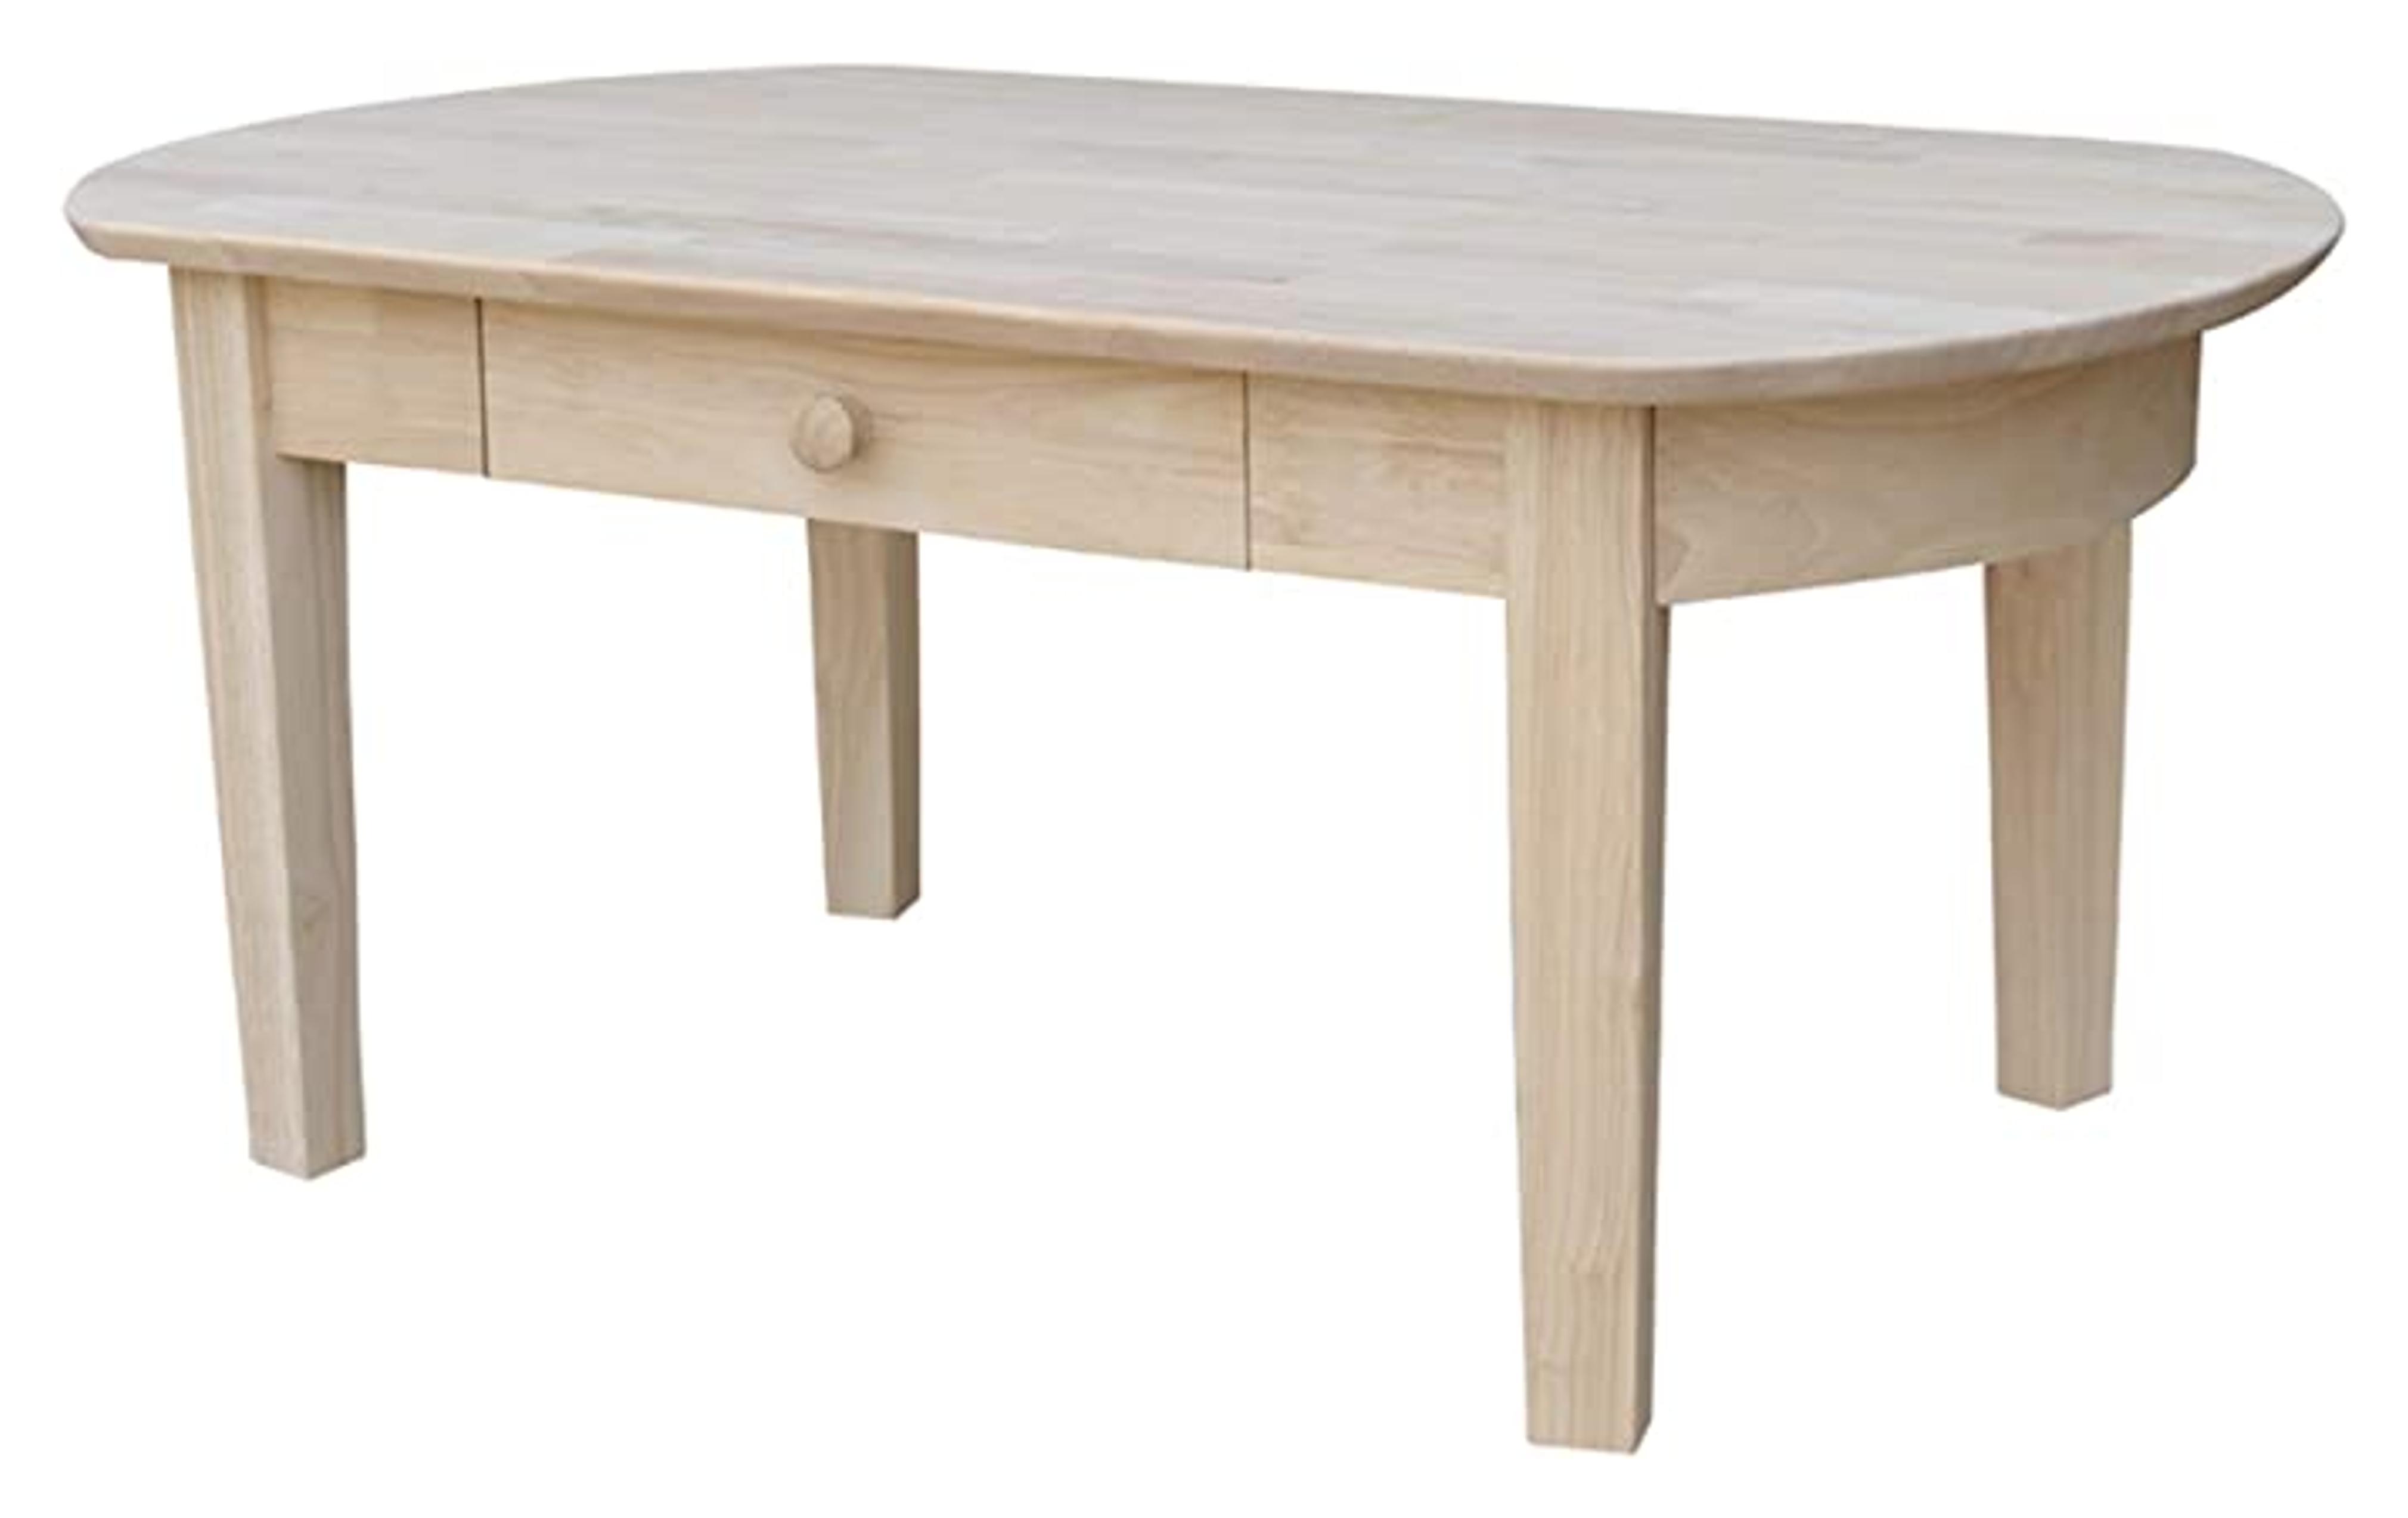 Amazon.com: International Concepts Phillips Oval Coffee Table, Unfinished : Home & Kitchen